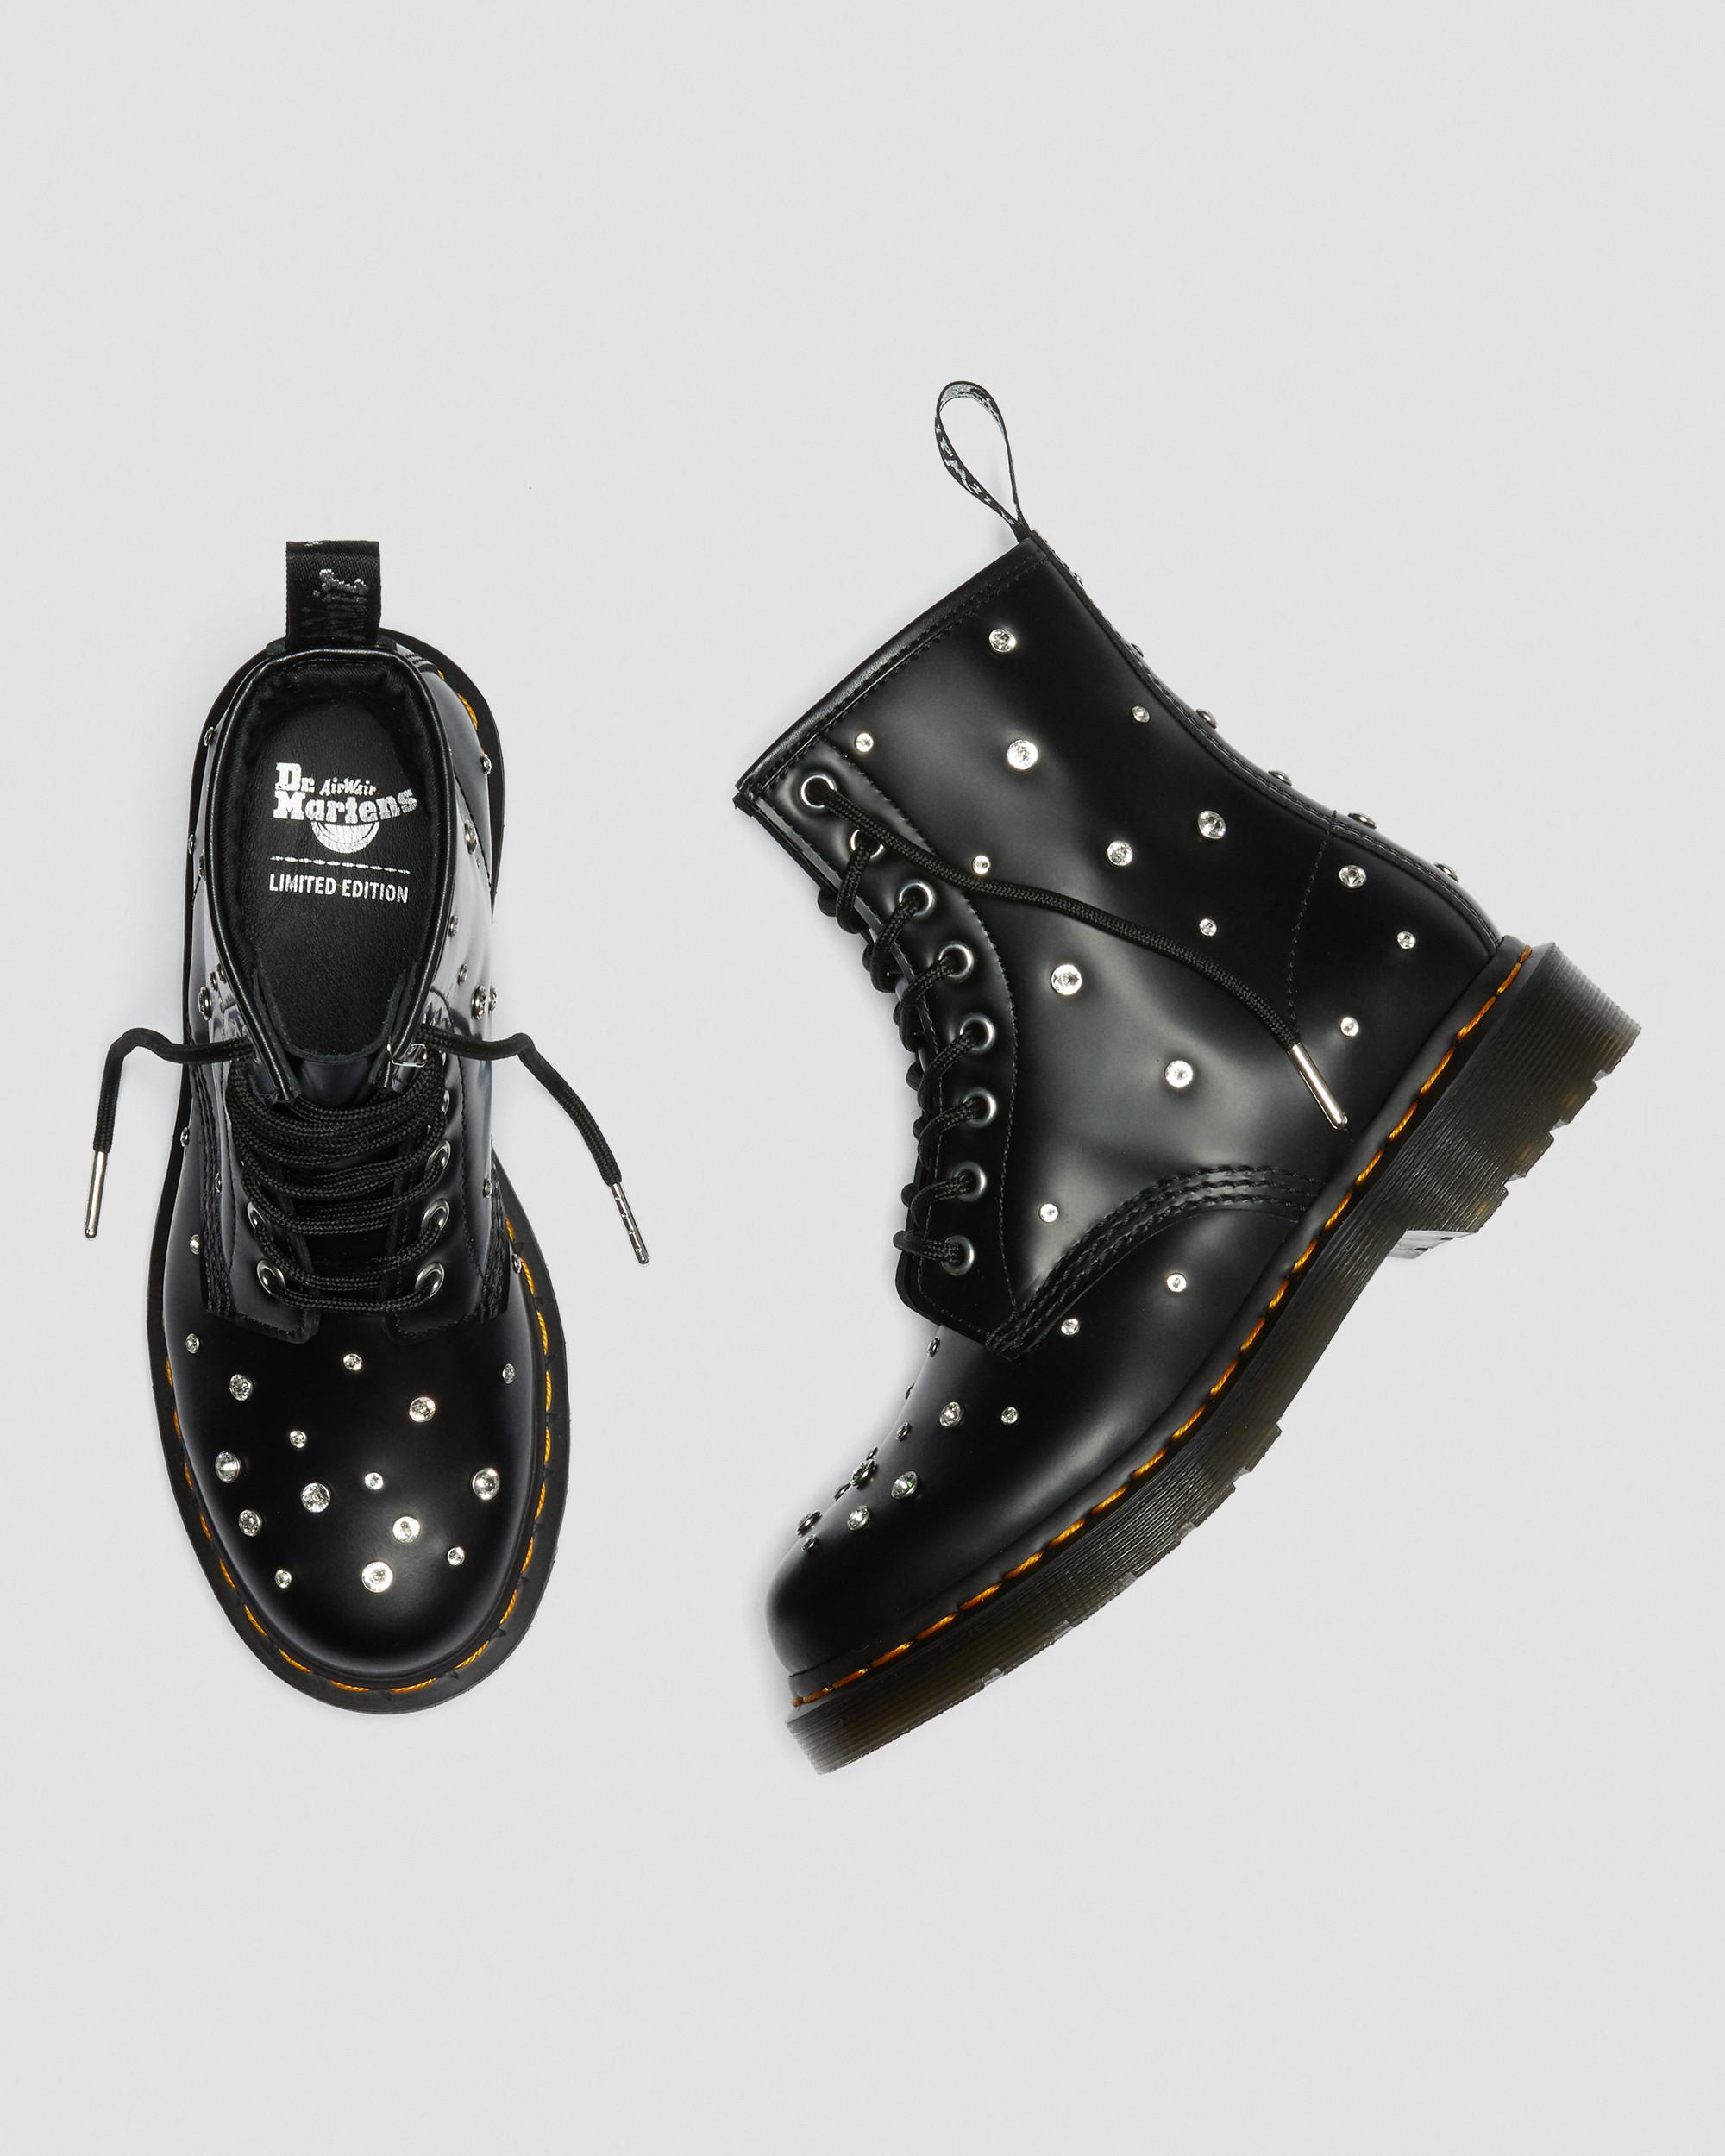 1460 Swarovski Leather Lace Up Boots in Black | Dr. Martens